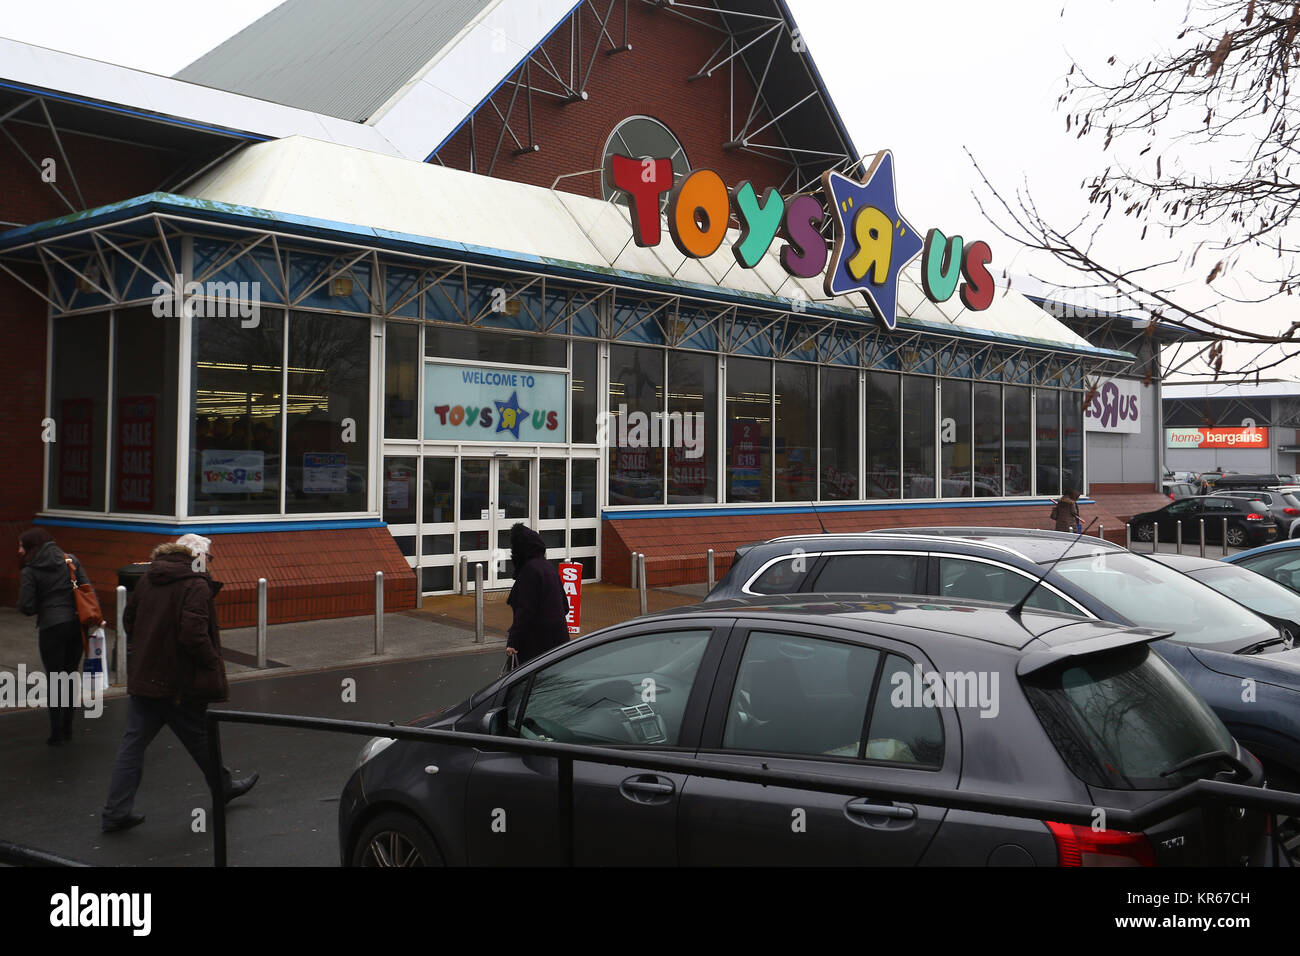 Stockport, UK. 19th Dec, 2017. A general view of the Stockport Peel Centre branch of Toys R US, Greater Manchester, UK. Credit: Philip Oldham/Alamy Live News. Stock Photo